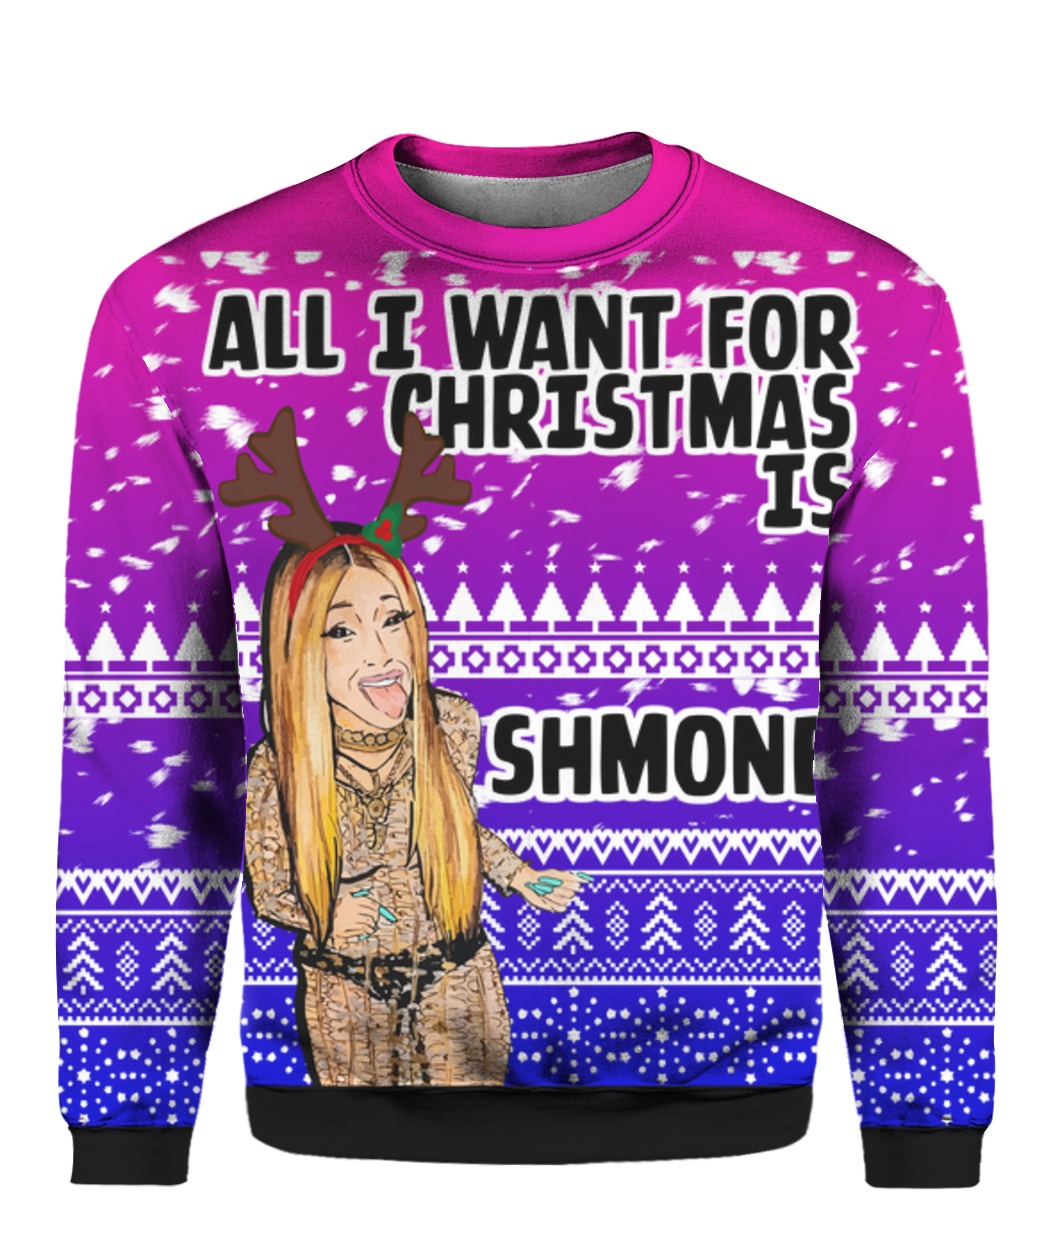 All I Want For Christmas Is Shmoney Cardi B Ugly Sweater - Trends Bedding